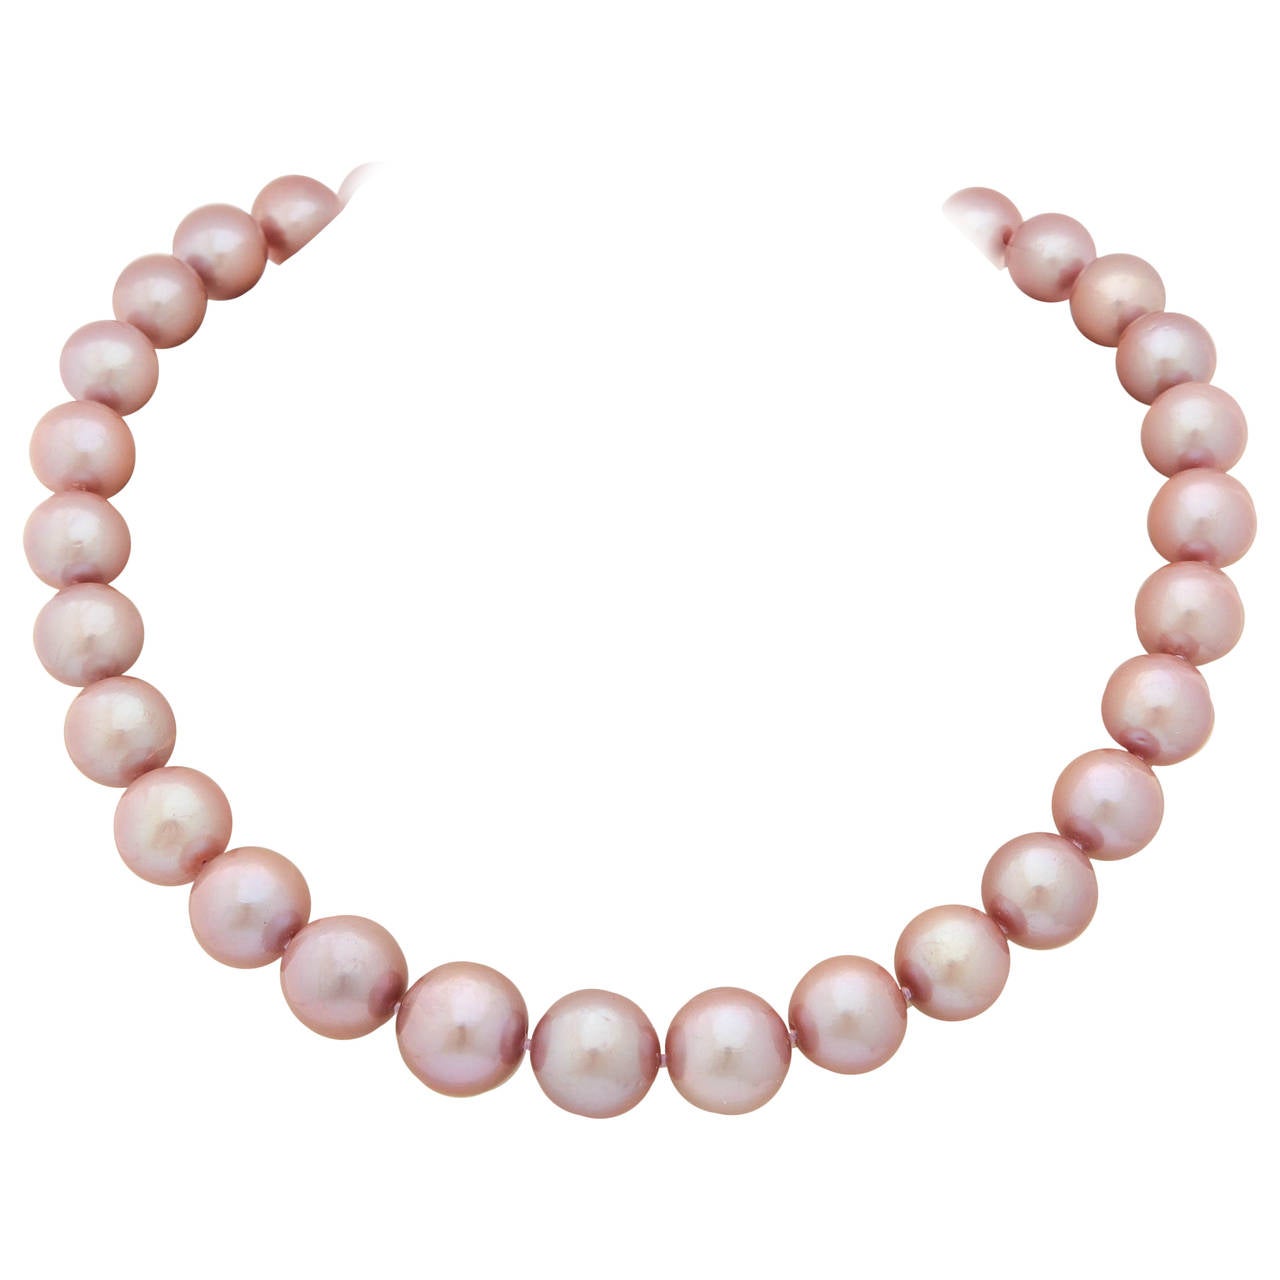 Exquisite Pink Pearl Necklace